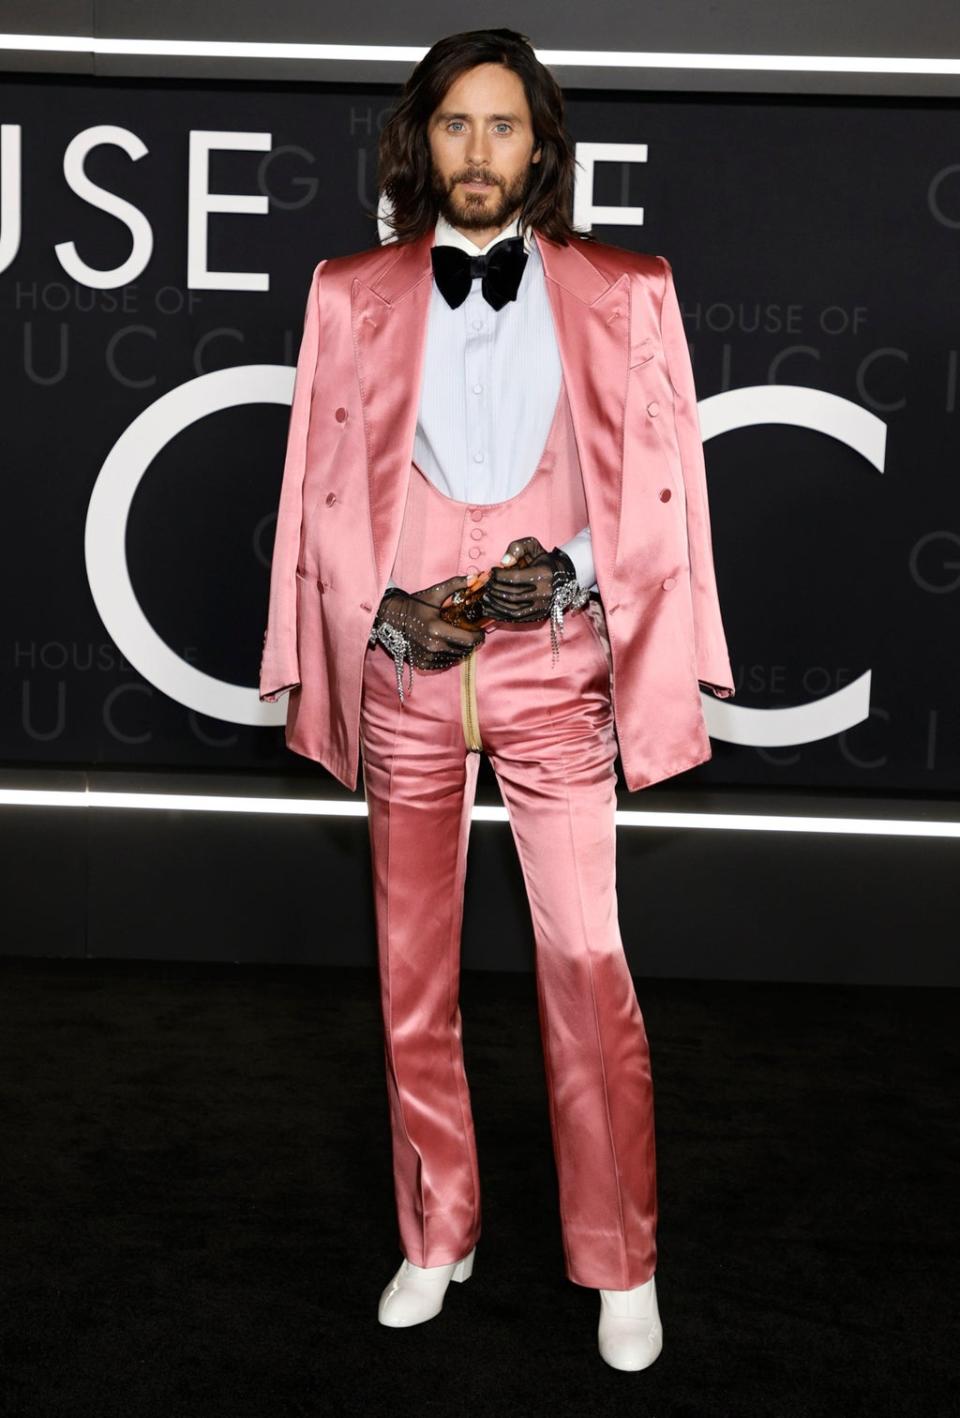 Jared Leto at House of Gucci premiere wearing Gucci (Getty Images)